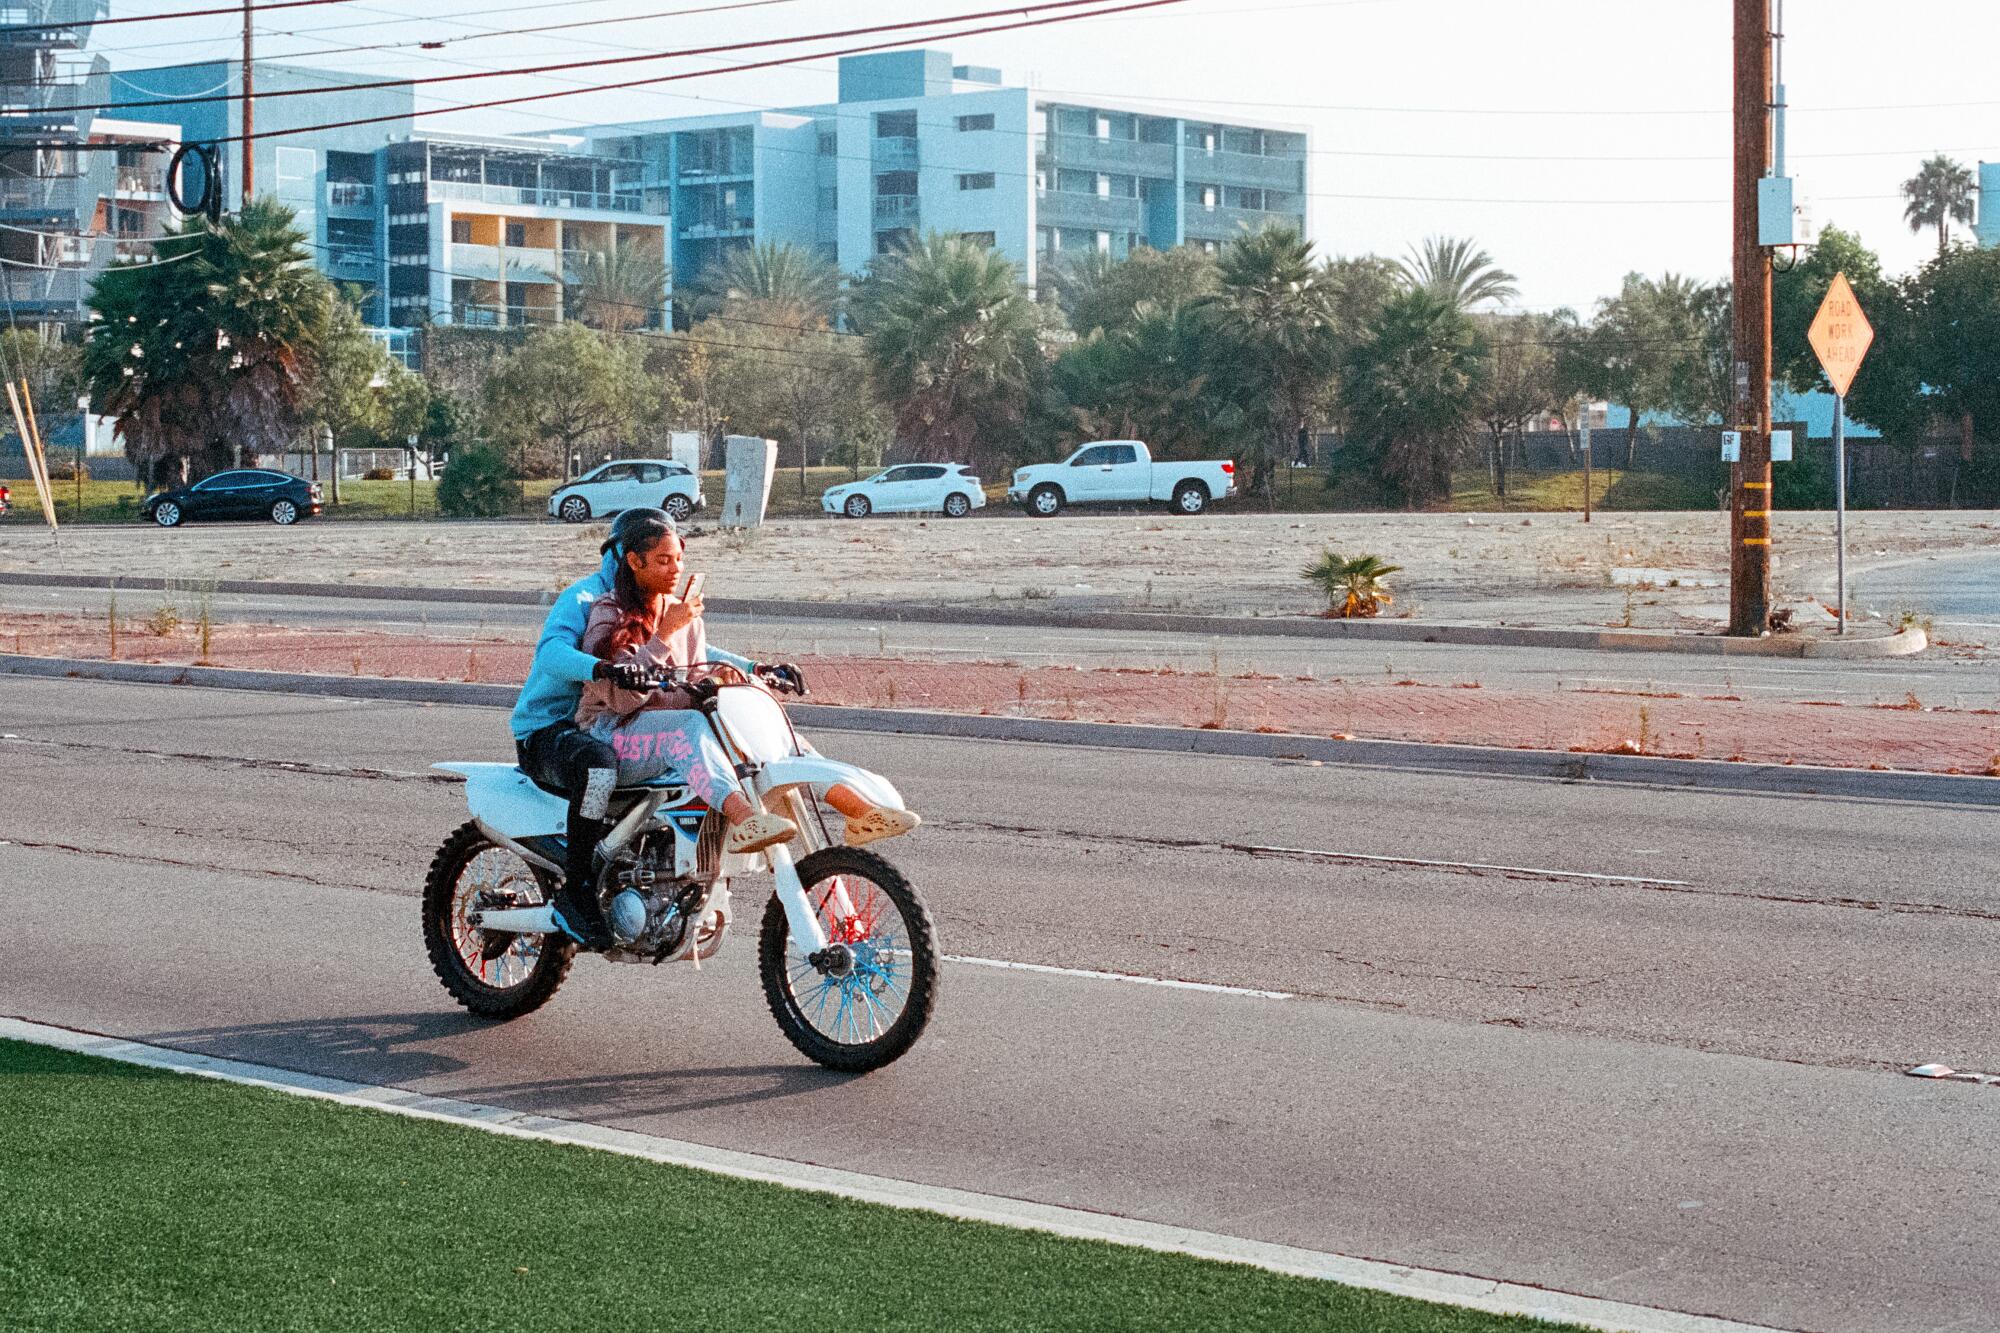 Two people zoom by on a bike.